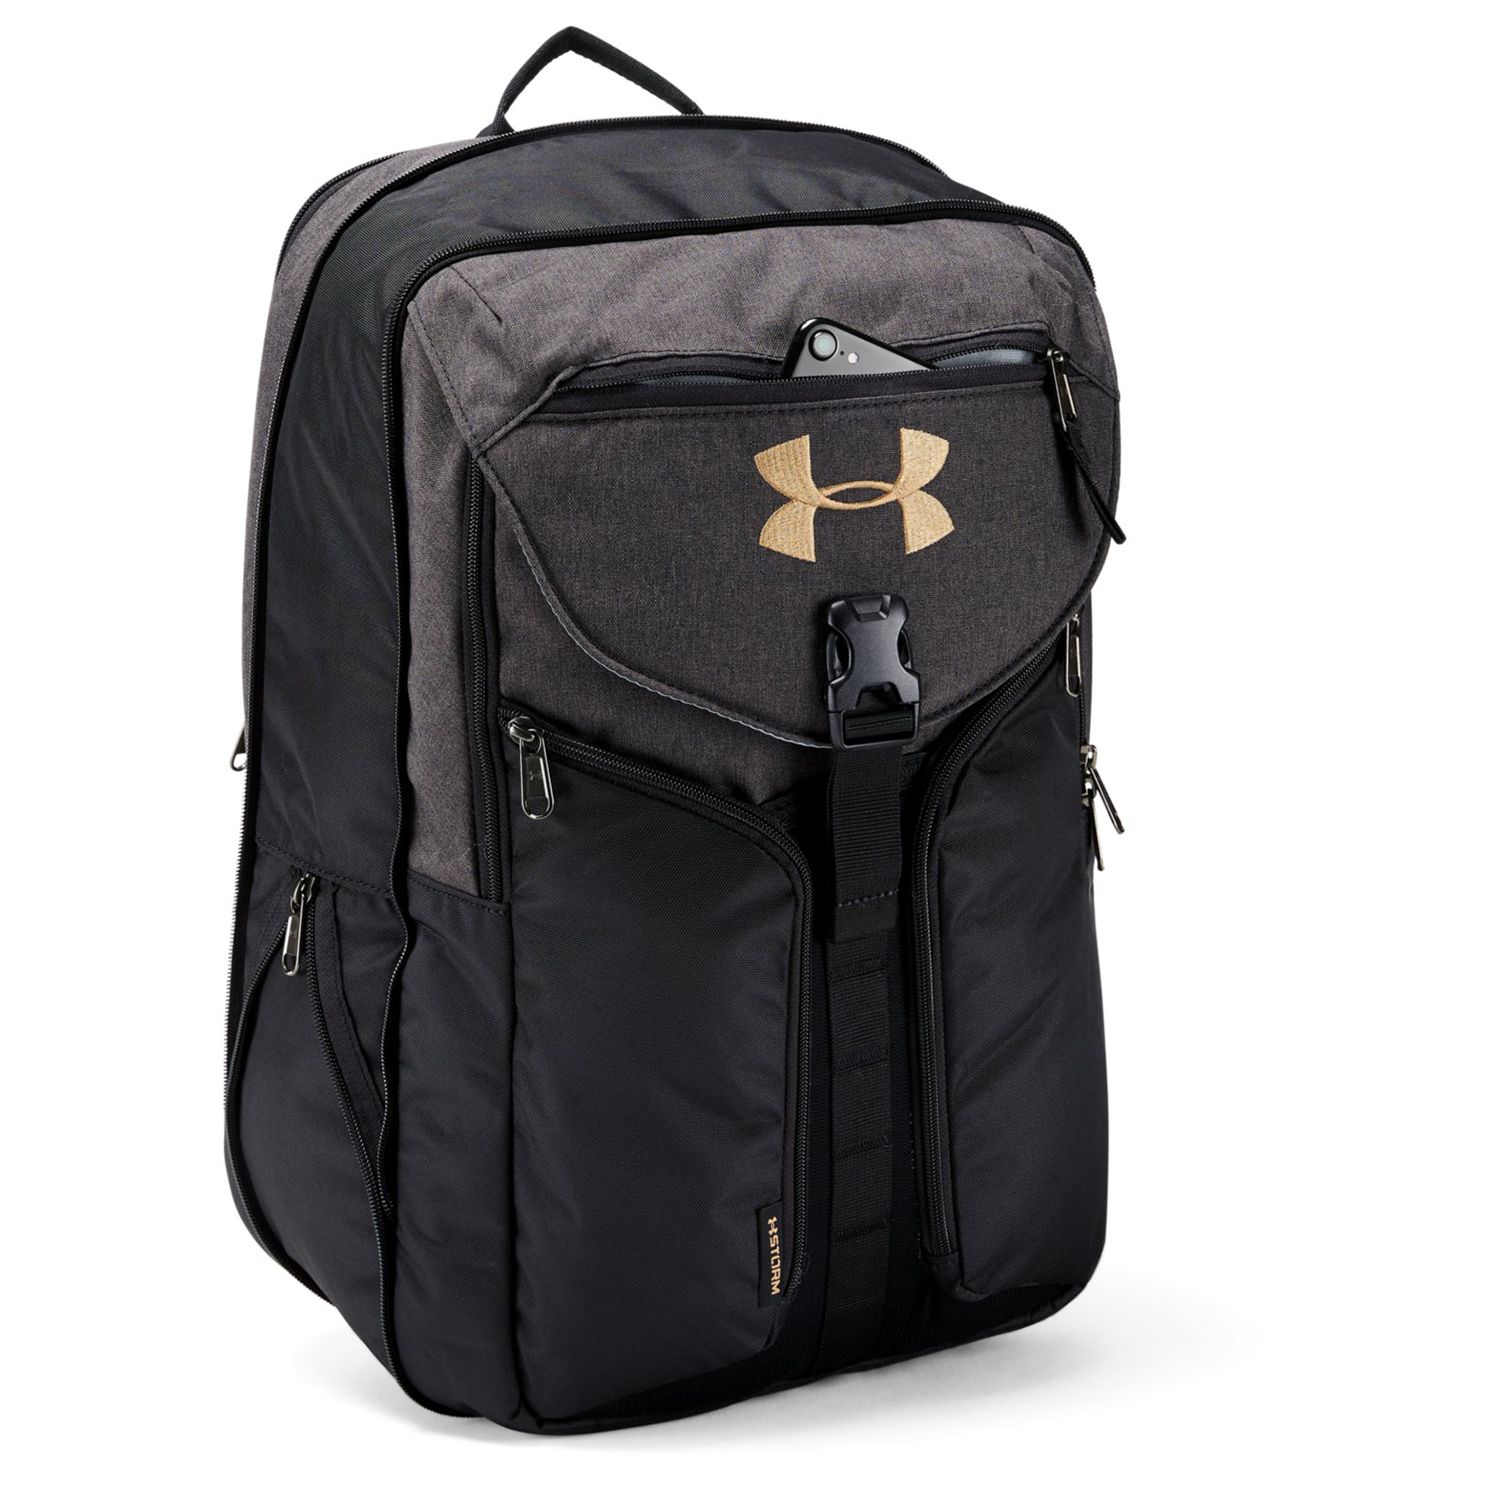 Under Armour Compel Sling 2.0 Backpack